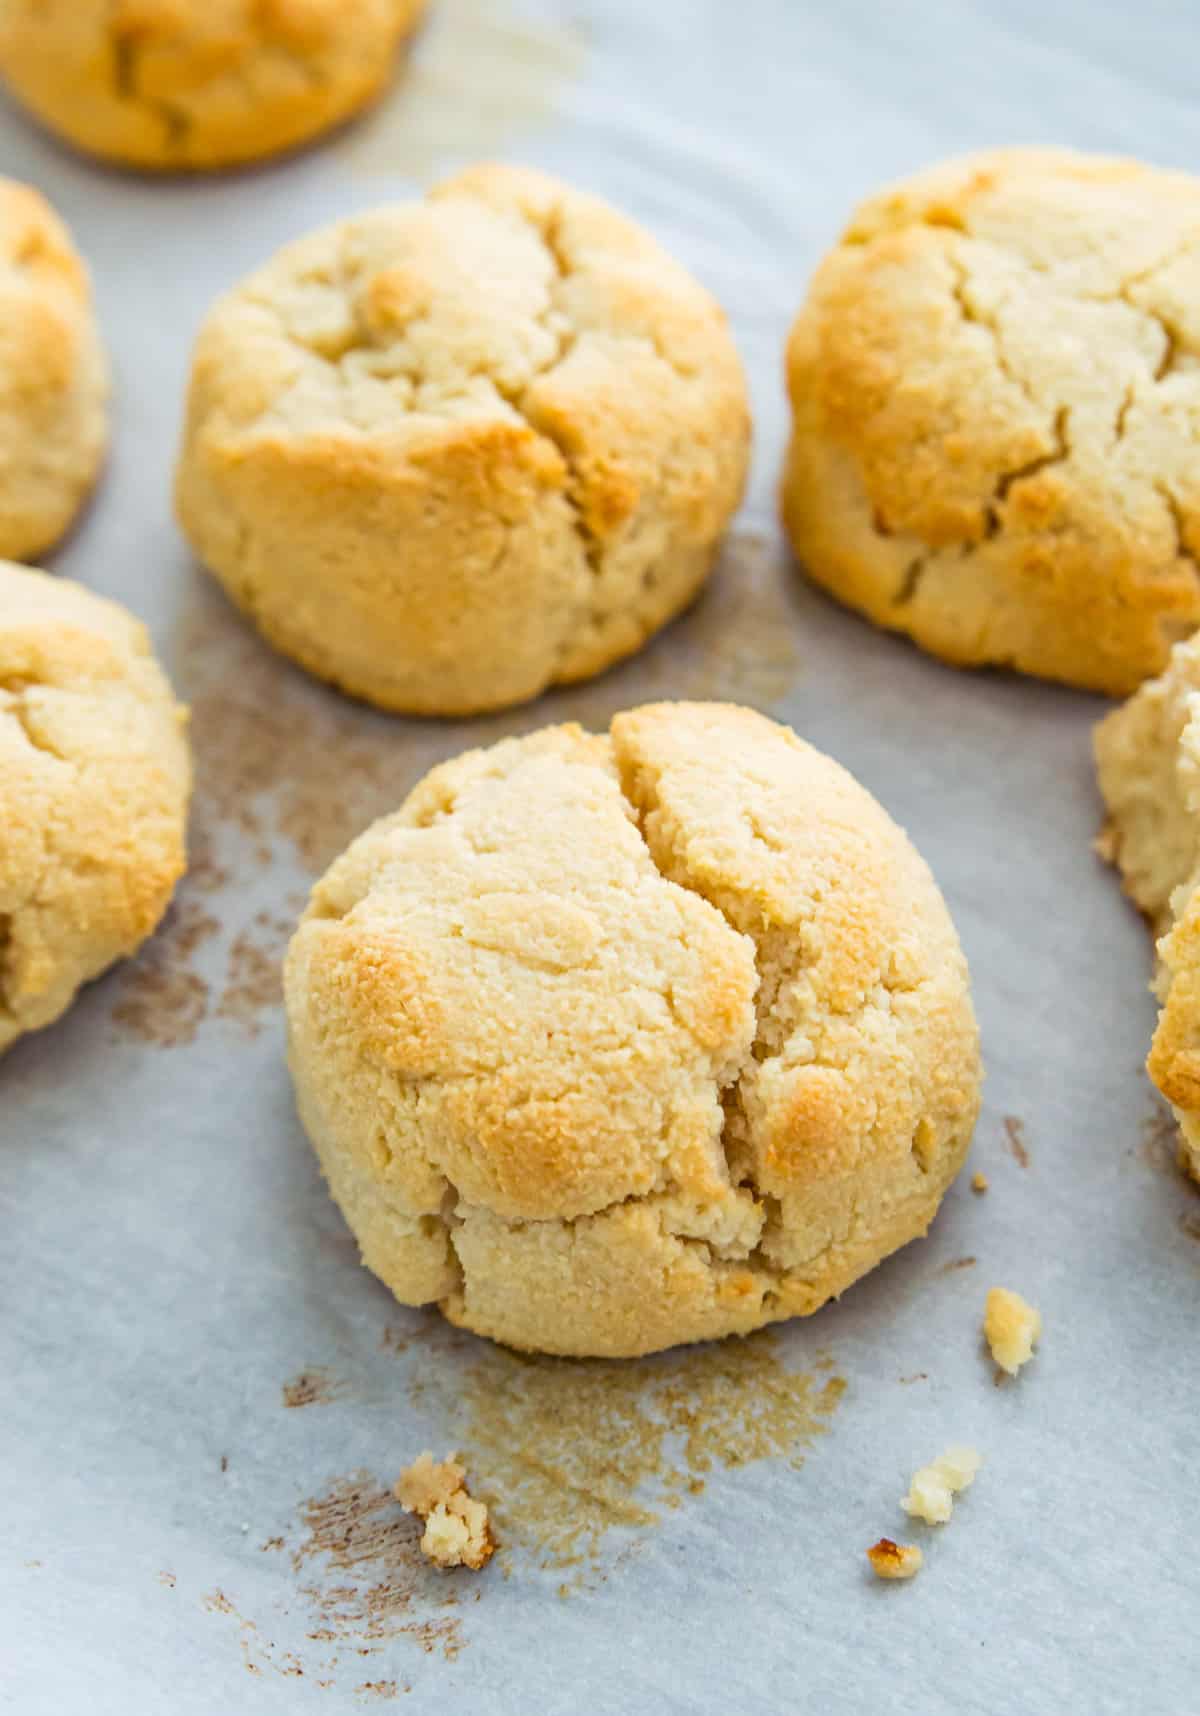 Baked biscuits on a baking sheet lined with parchment paper.